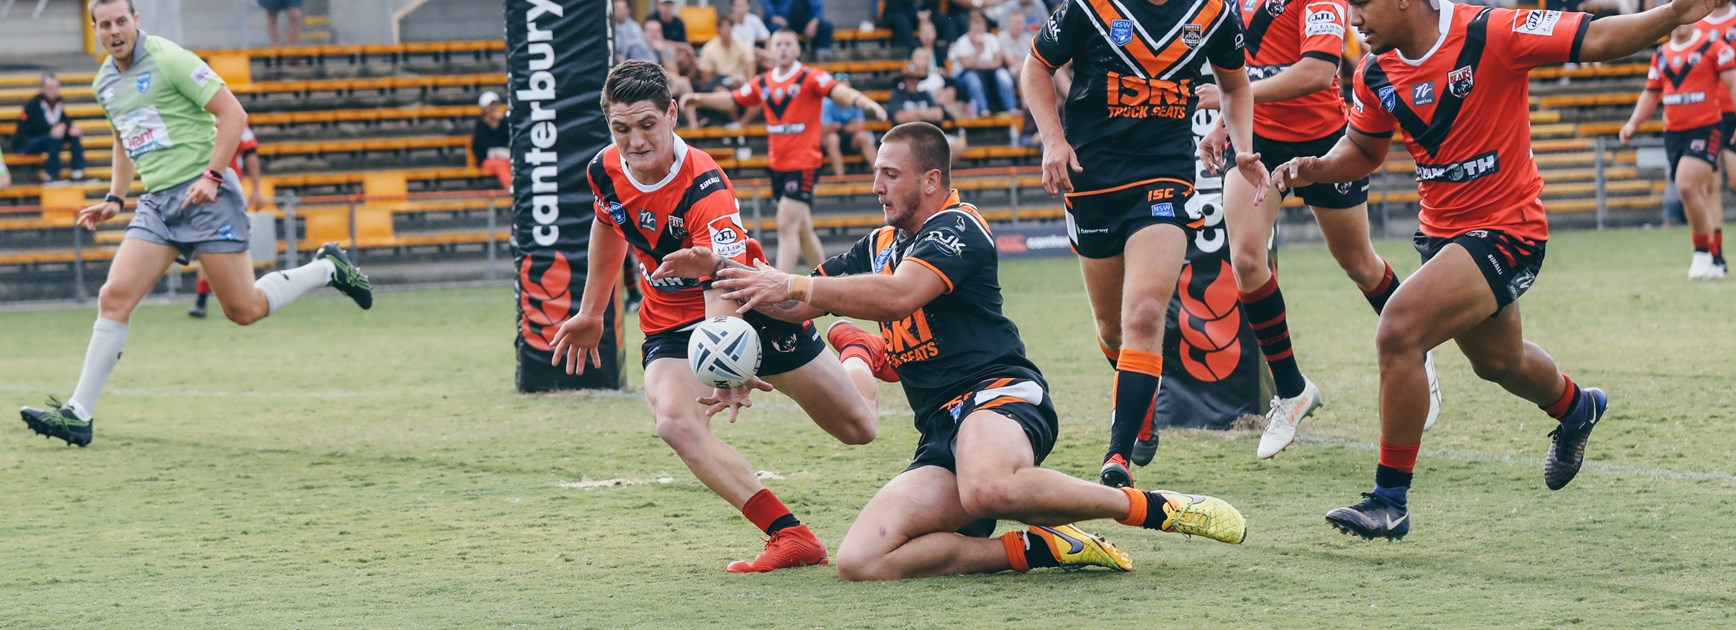 Wests Tigers come from behind to down Bears